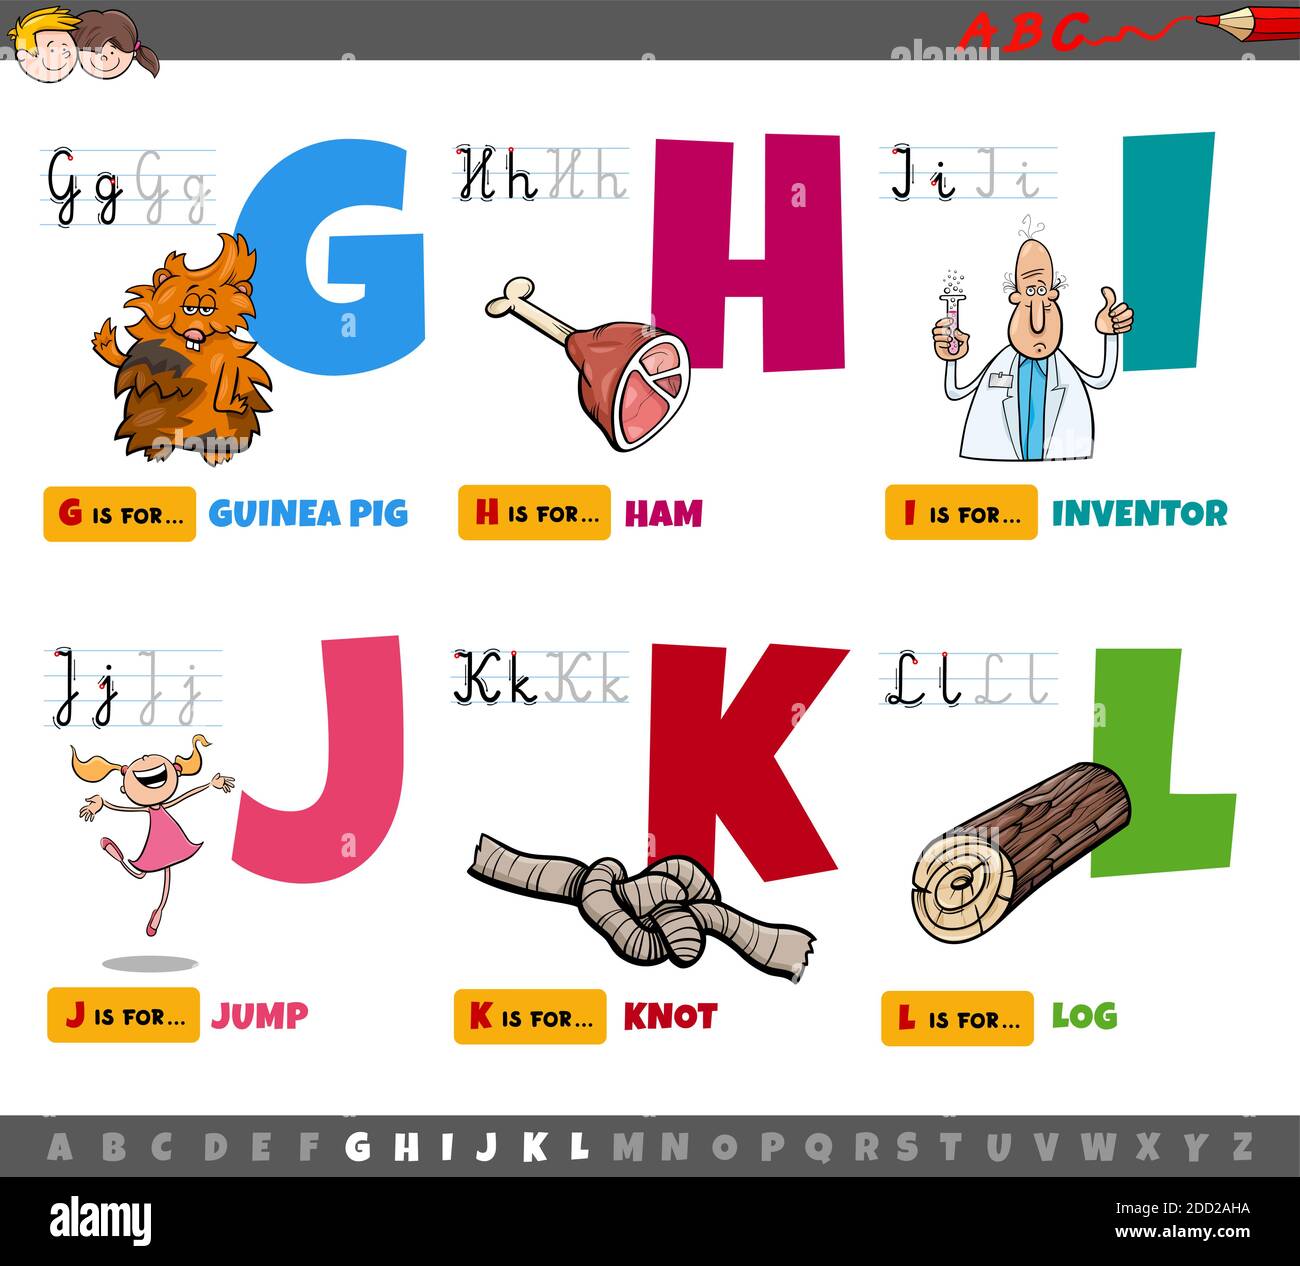 Cartoon illustration of capital letters from alphabet educational set for reading and writing practise for children from G to L Stock Vector